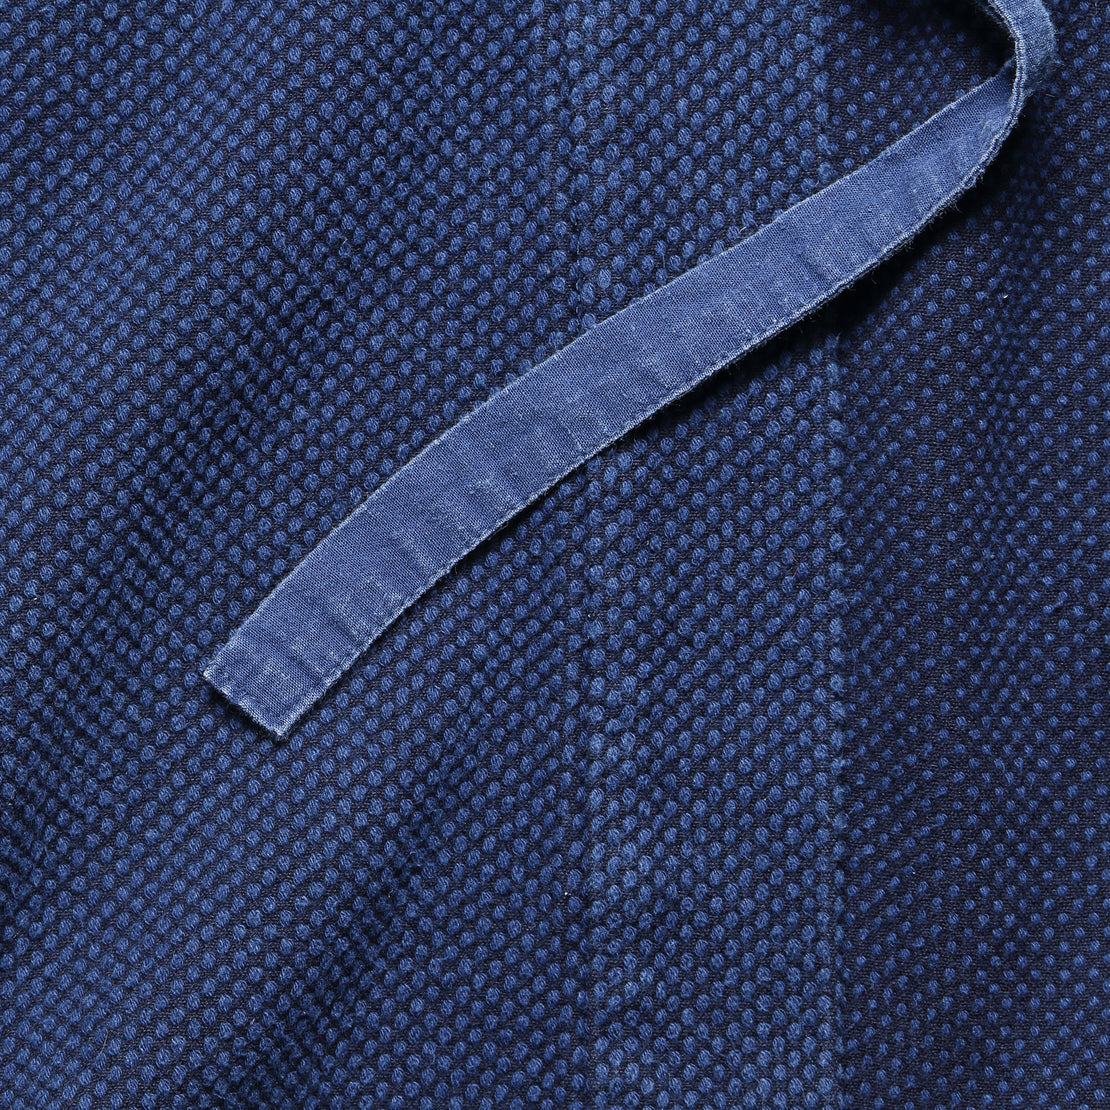 Textured Knit Japanese Kendo Jacket - Indigo - Vintage - STAG Provisions - W - One & Done - Apparel